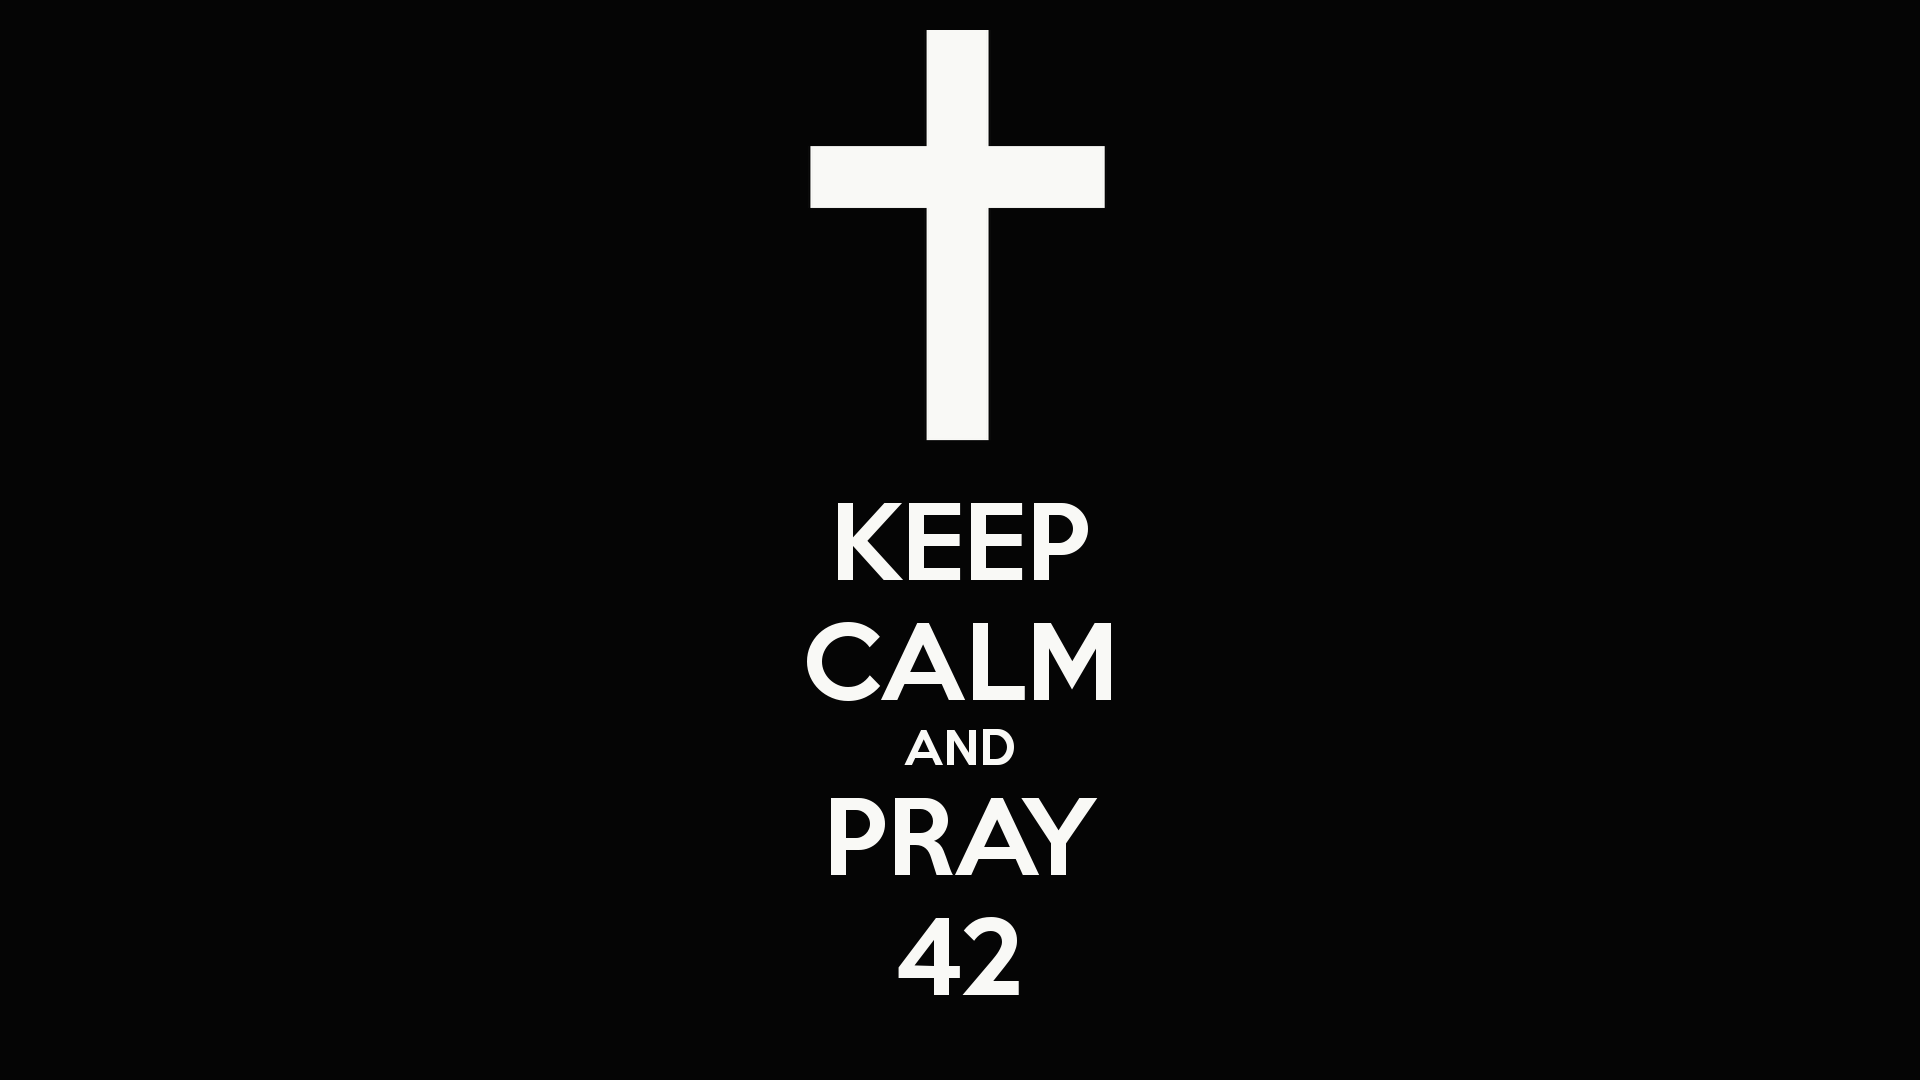 KEEP CALM AND PRAY 42   KEEP CALM AND CARRY ON Image Generator